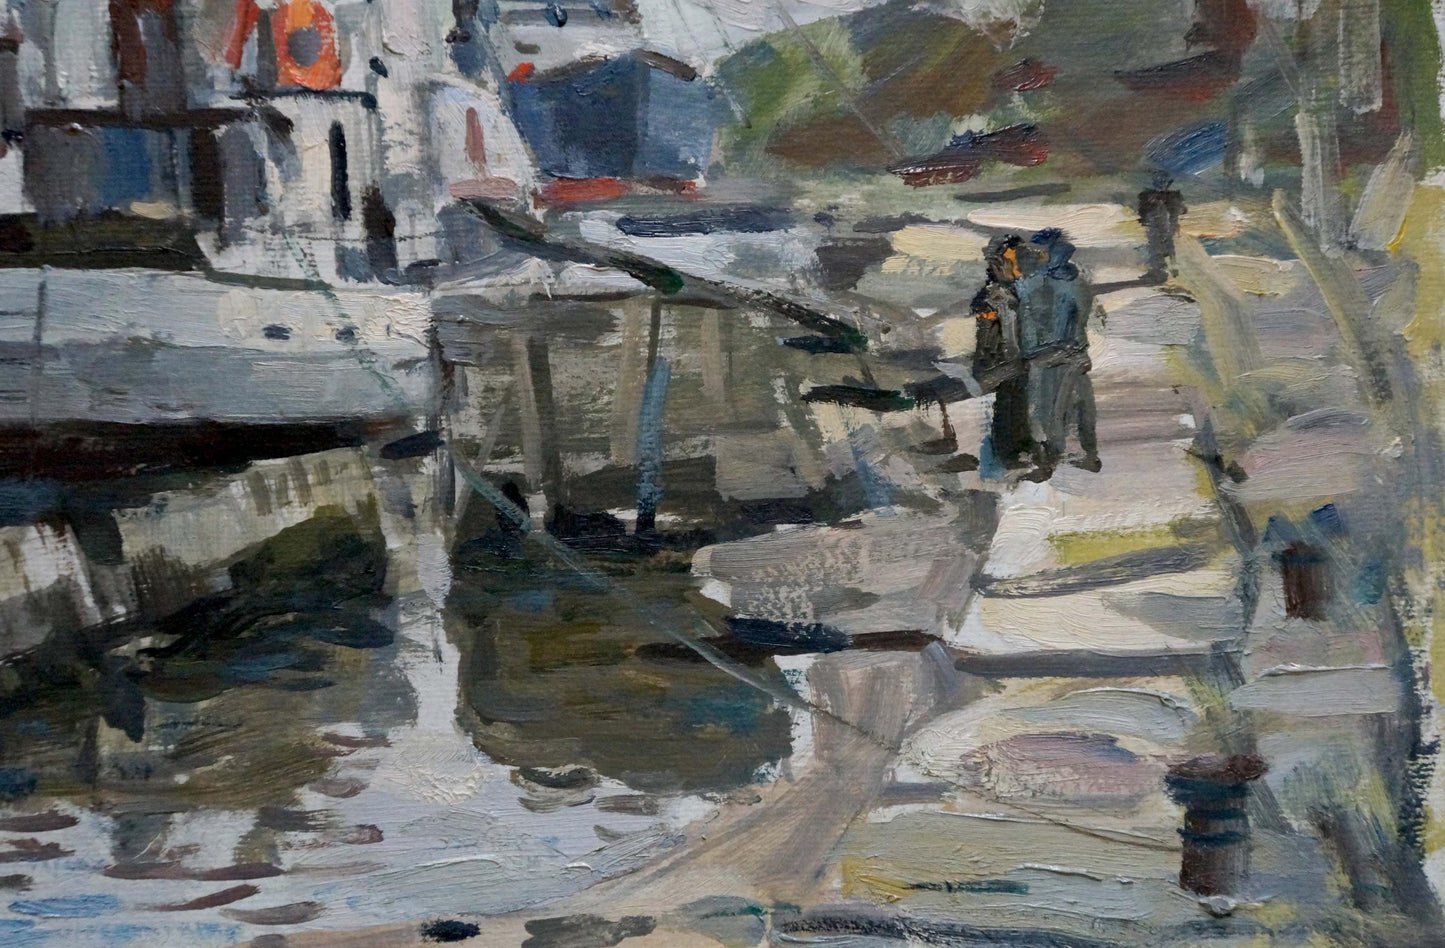 Oil painting In Port